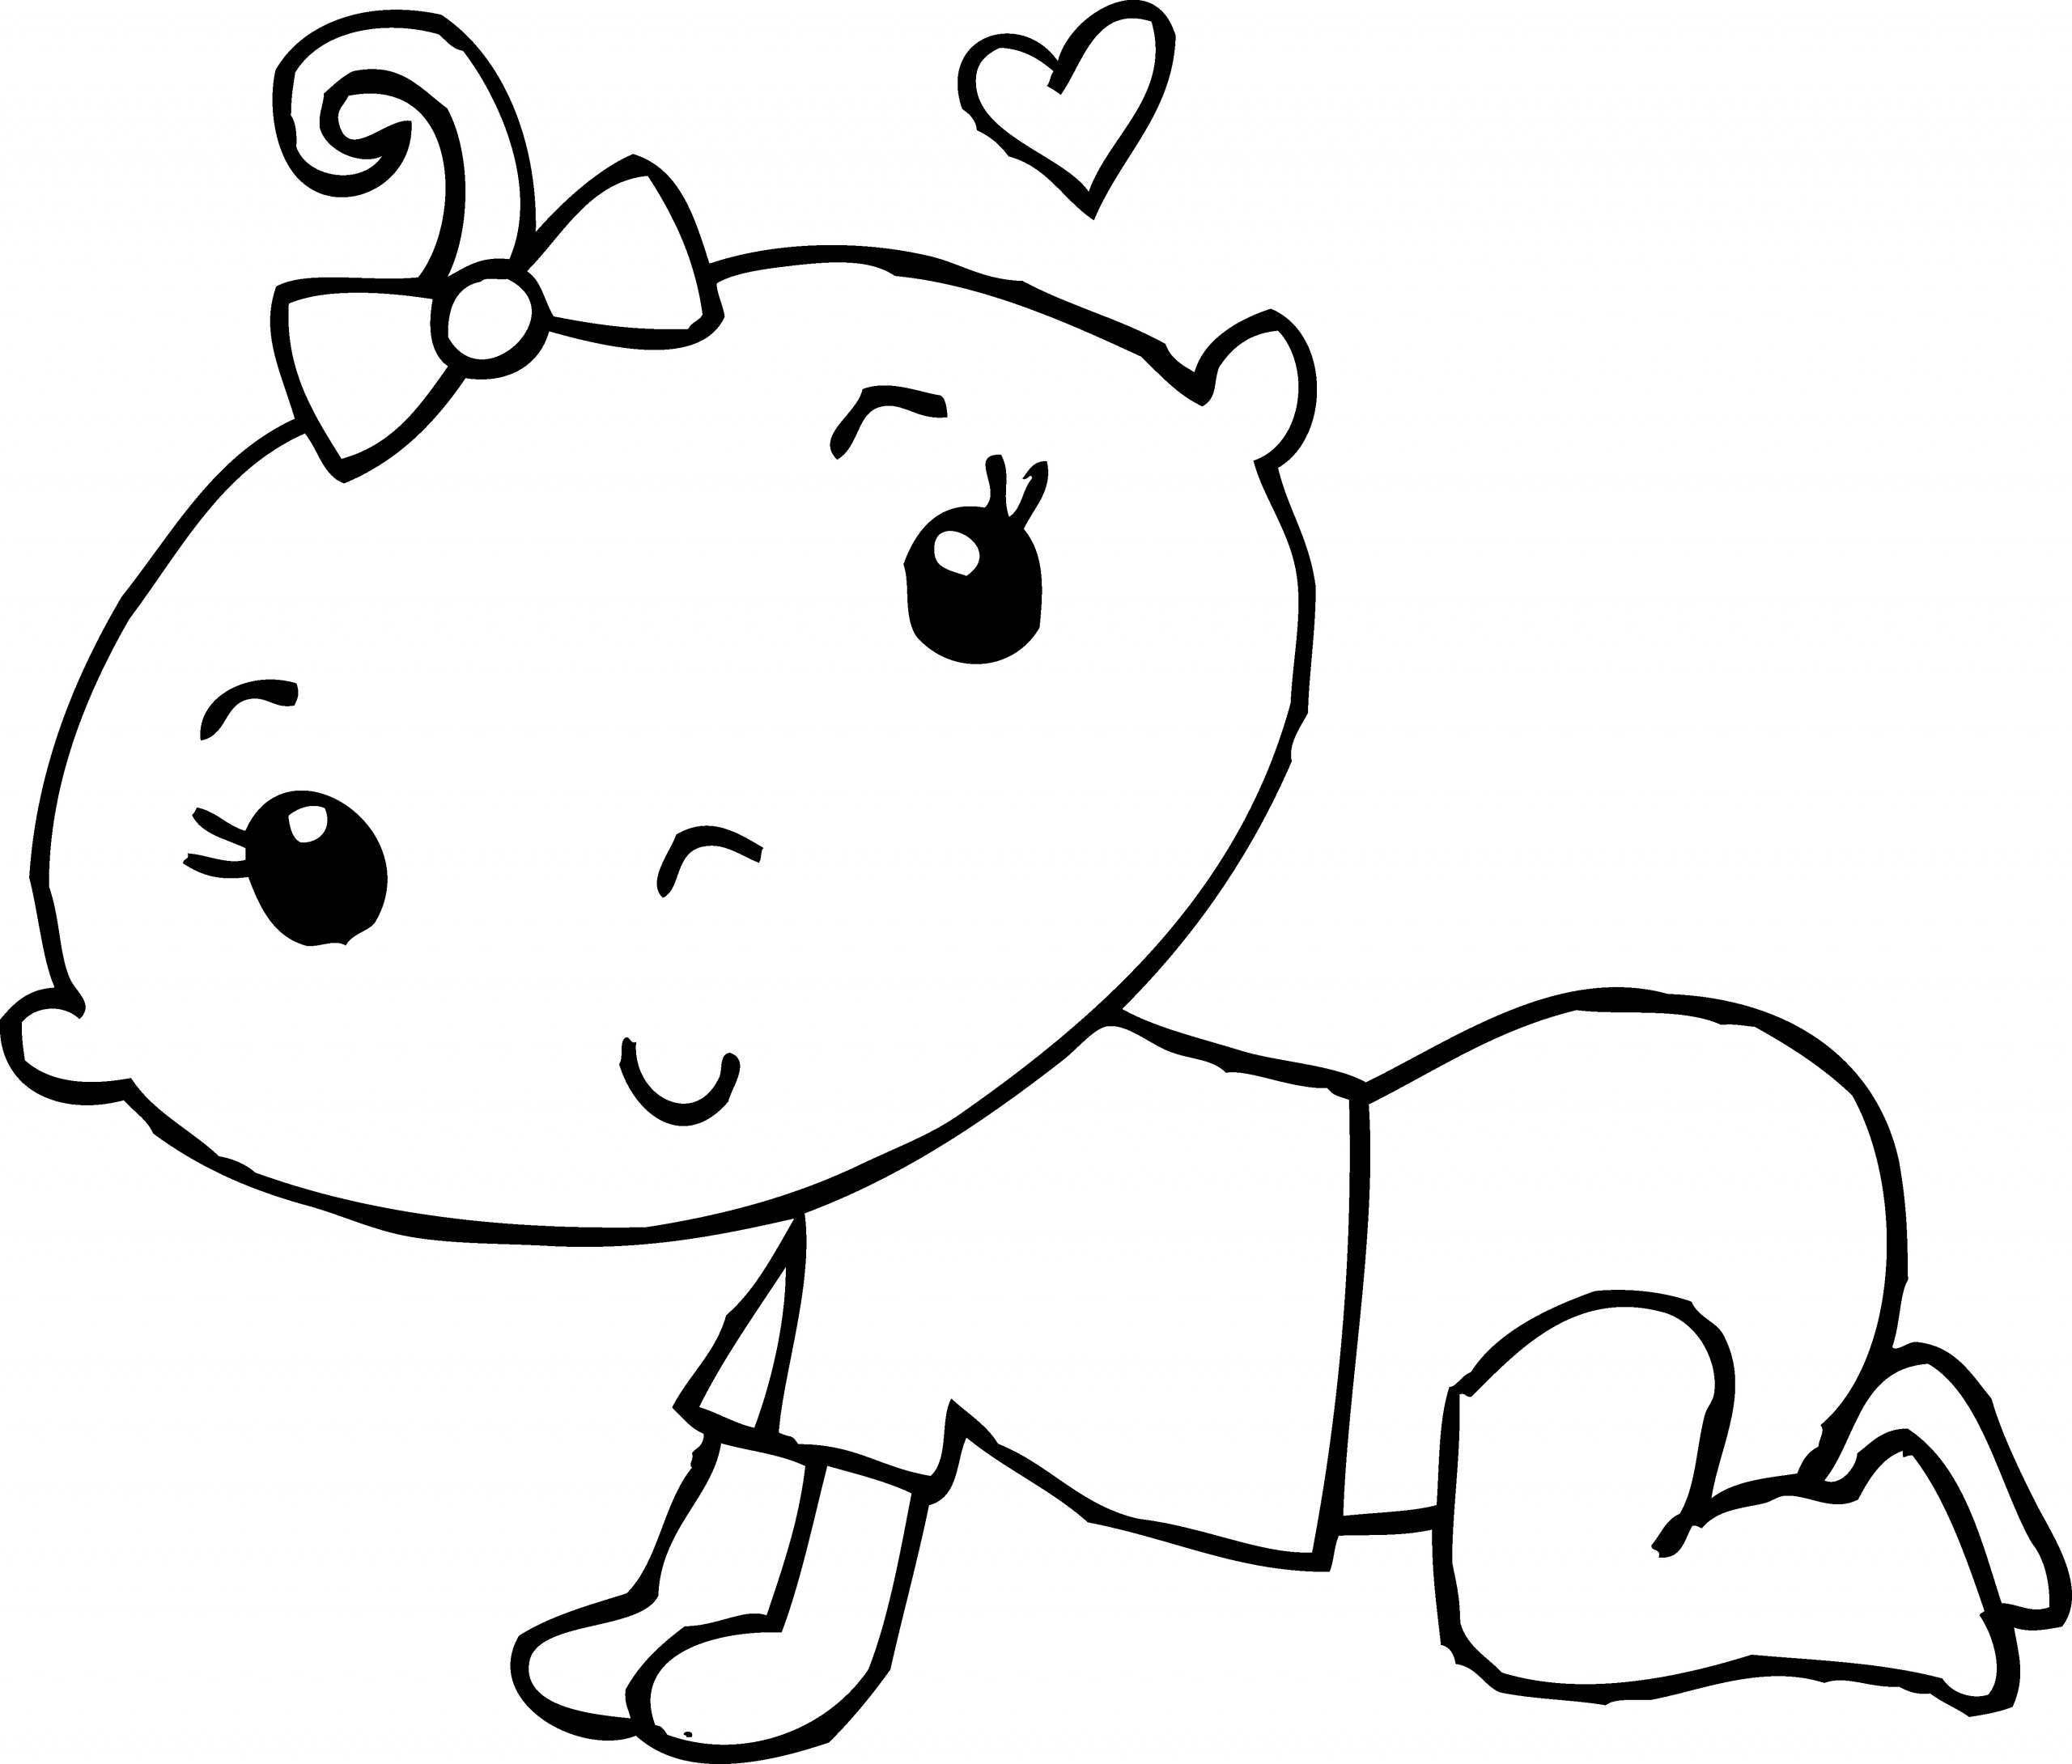 Baby Girls Coloring Pages
 Cute Baby Girl Coloring Page Free Clip Art